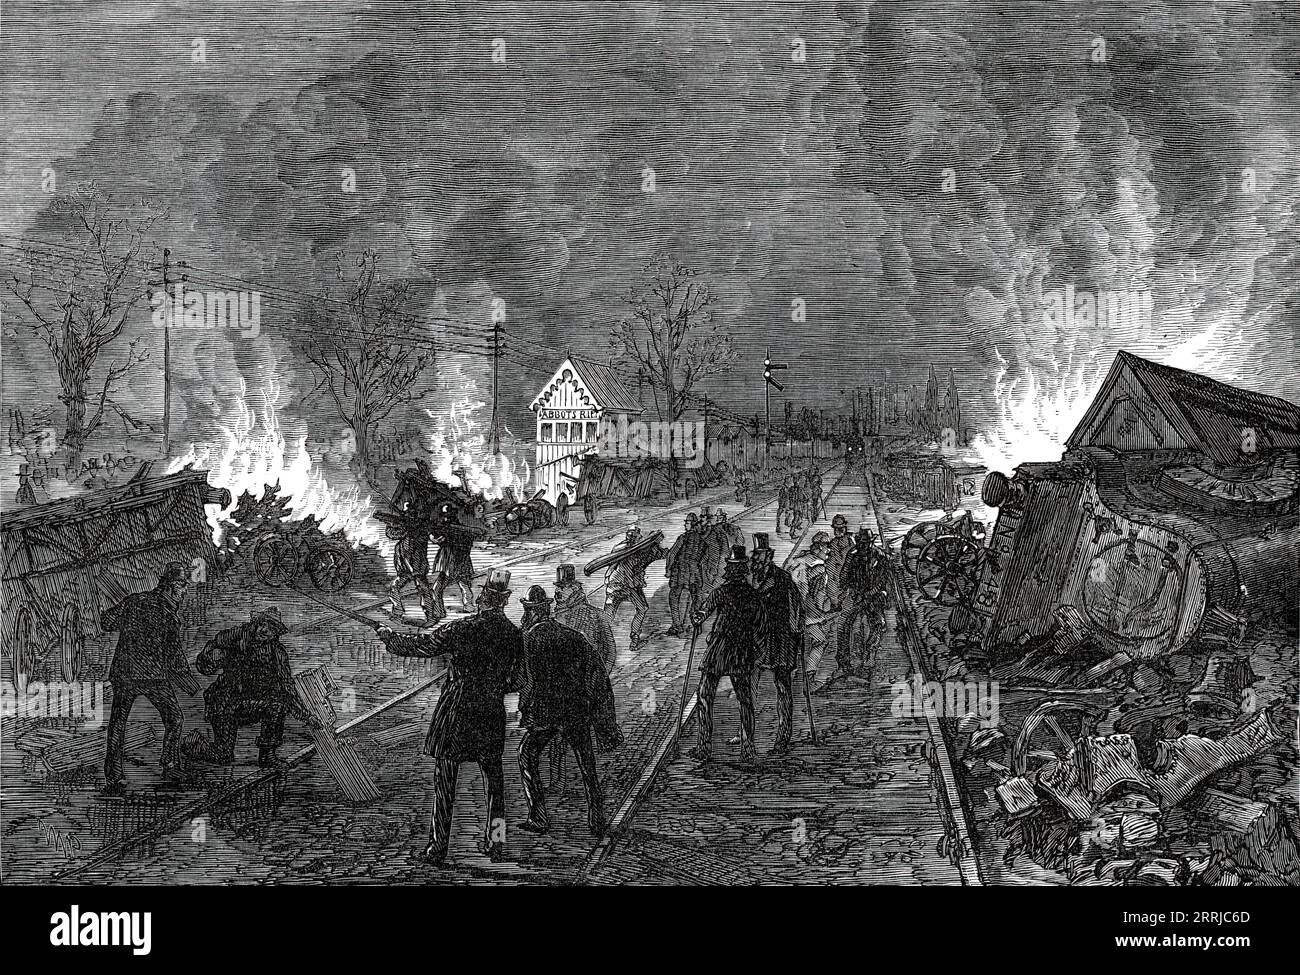 The Railway Accident at Abbotts Ripton, near Huntingdon: working parties removing the injured, from a sketch by Mr. Gompertz, a passenger, 1876. On 21 January 1876, the Edinburgh-London Special Scotch Express was involved in a collision, during a blizzard, with a coal train on the Great Northern Railway main line. A second collision occurred minutes later when an express to Leeds crashed into the wreckage obstructing the northbound line. Thirteen passengers died, and 53 passengers and 6 traincrew members were injured. Factors included signal failure, bad weather and poor visibility. Snow and i Stock Photo